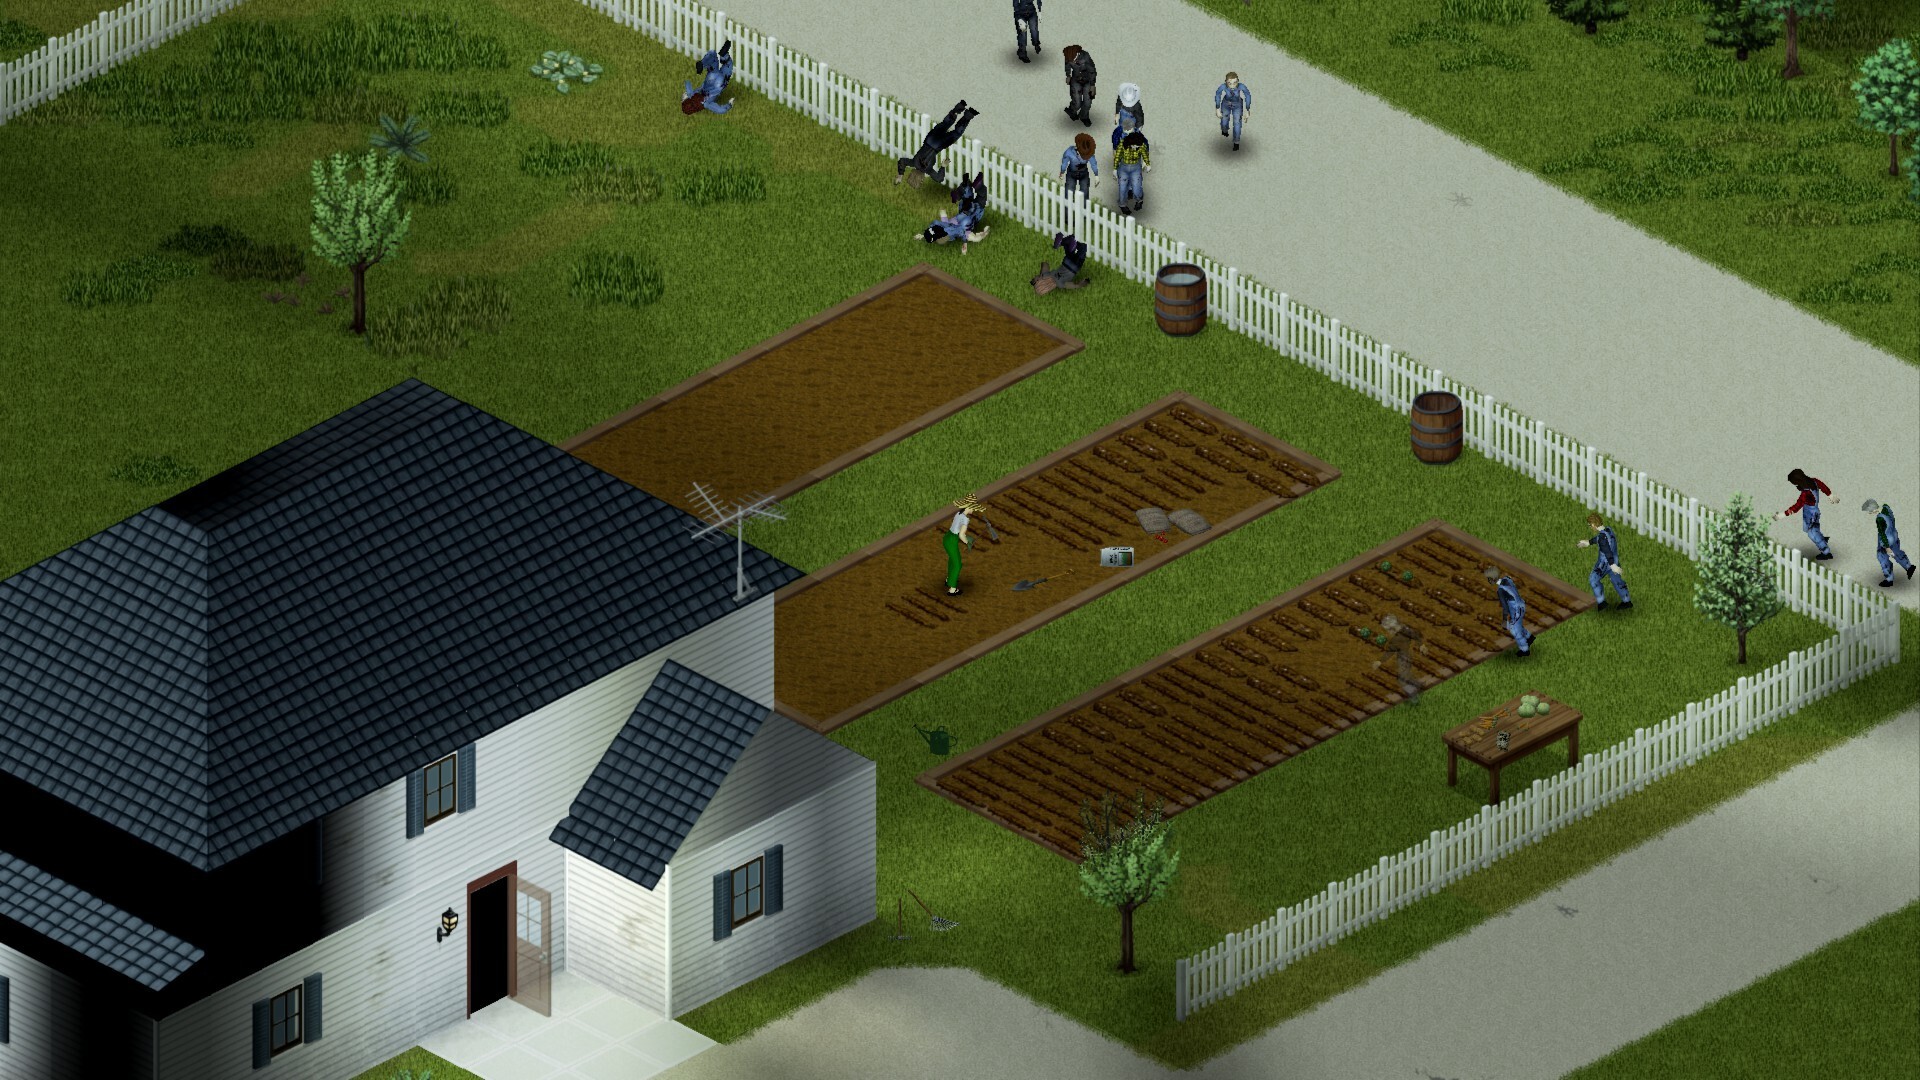 Over A Decade After Release, Project Zomboid Attracts An Astonishing Horde Of Players thumbnail